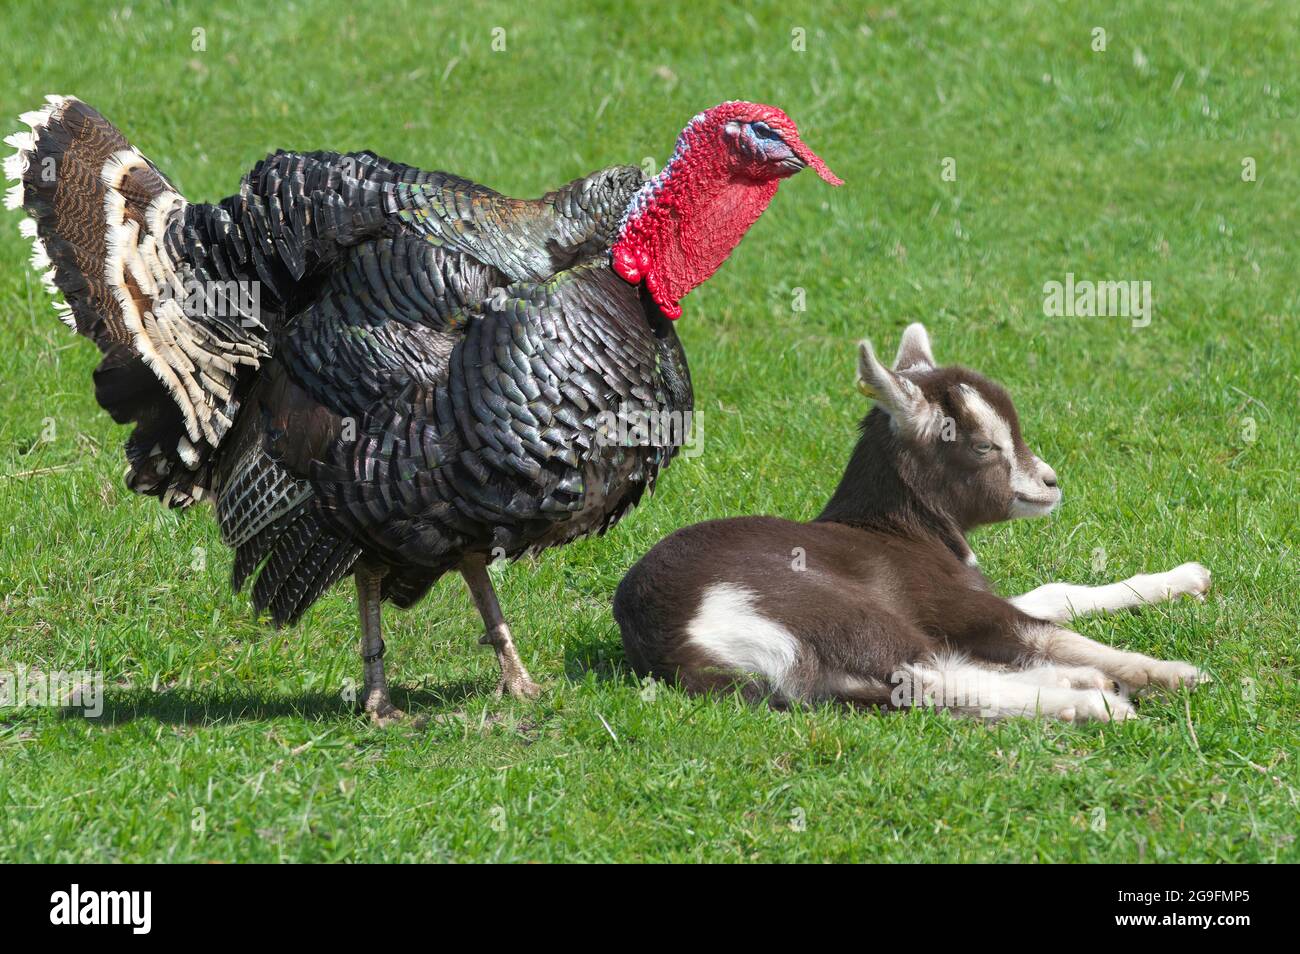 Domestic Turkey approaching young Thuringian Goat (Capra aegagrus hircus), sleeping on a pasture. Germany Stock Photo